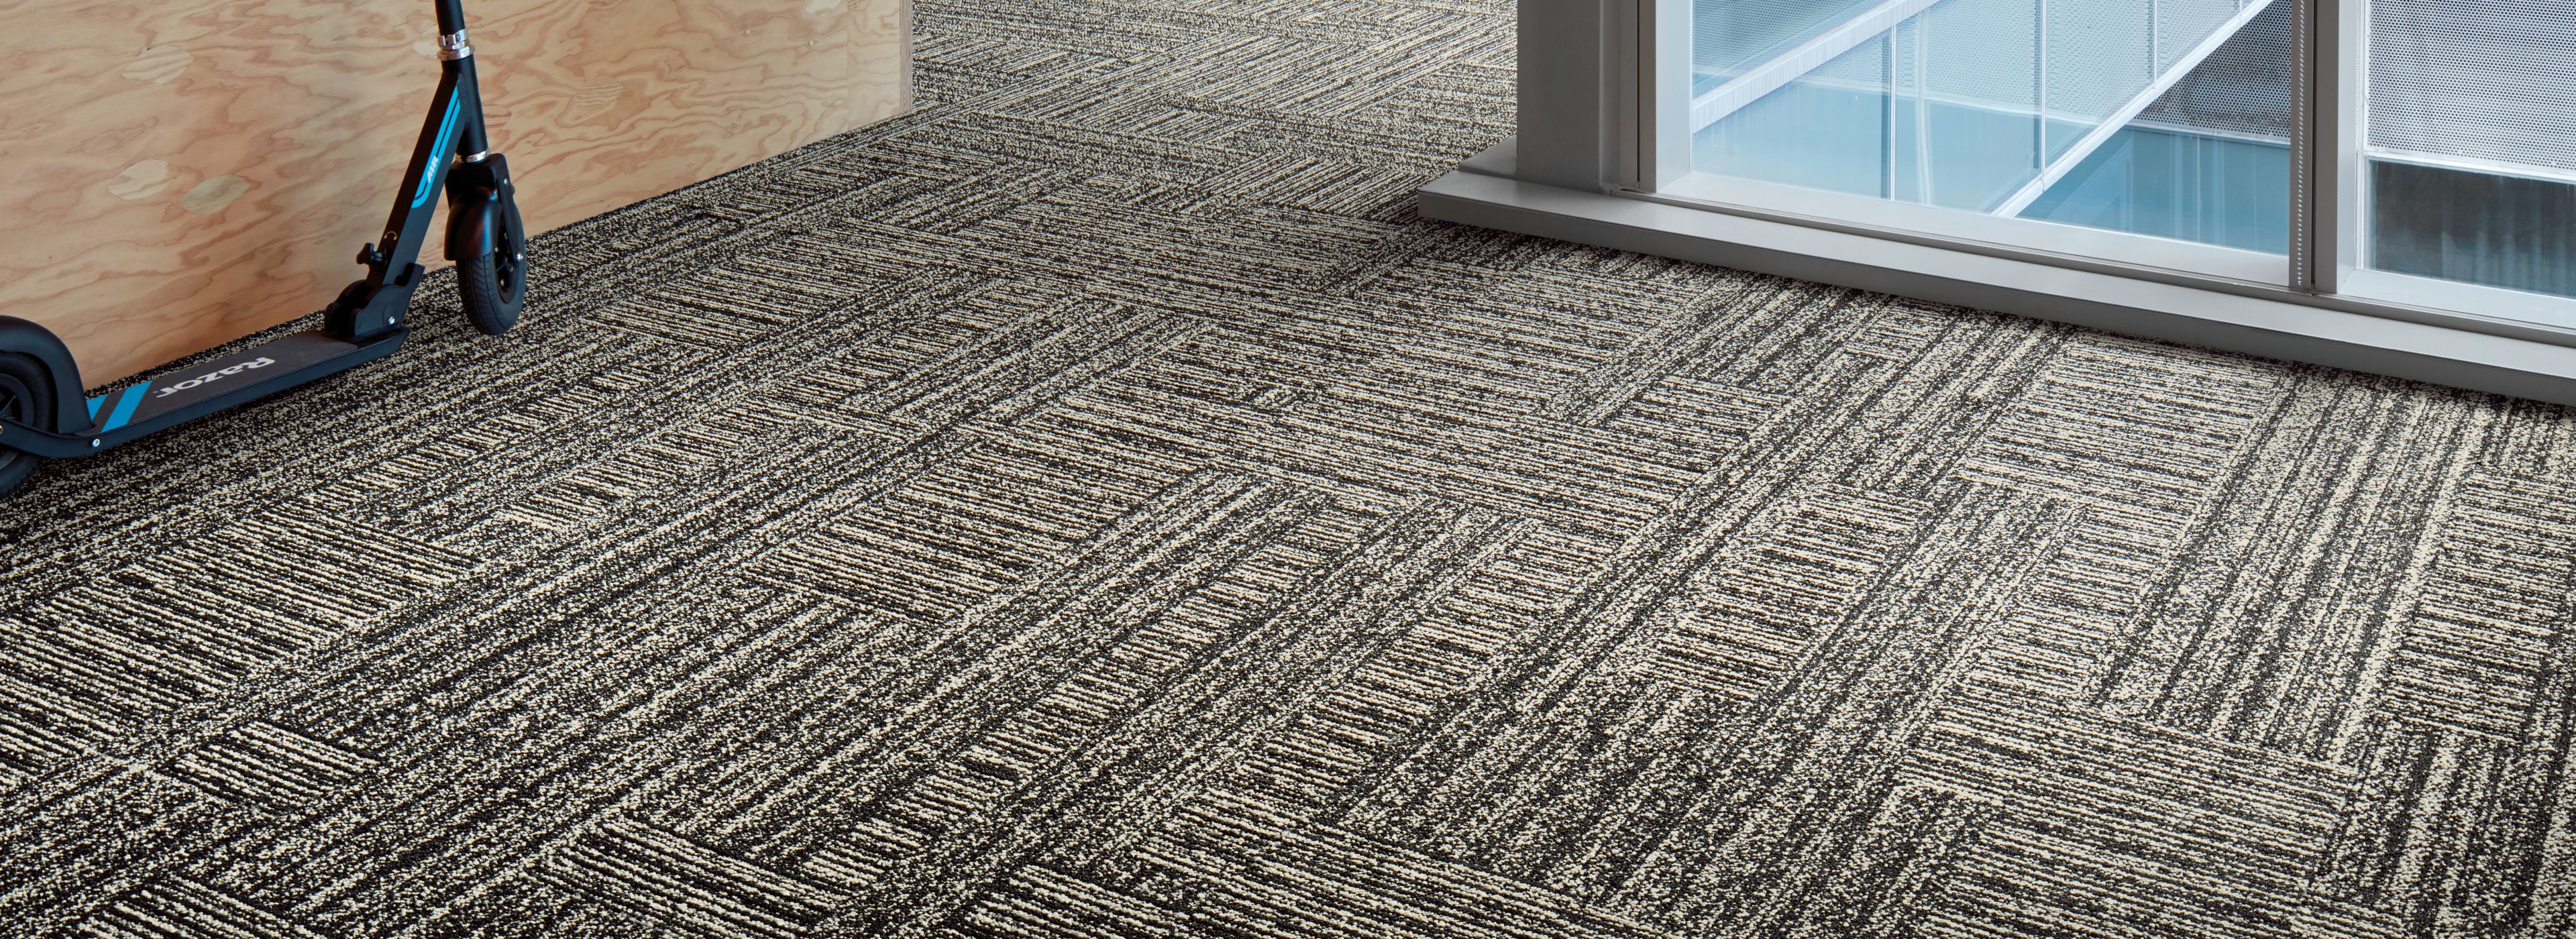 Interface Decibel and Hard Drive plank carpet tile in small area with glass windows image number 1